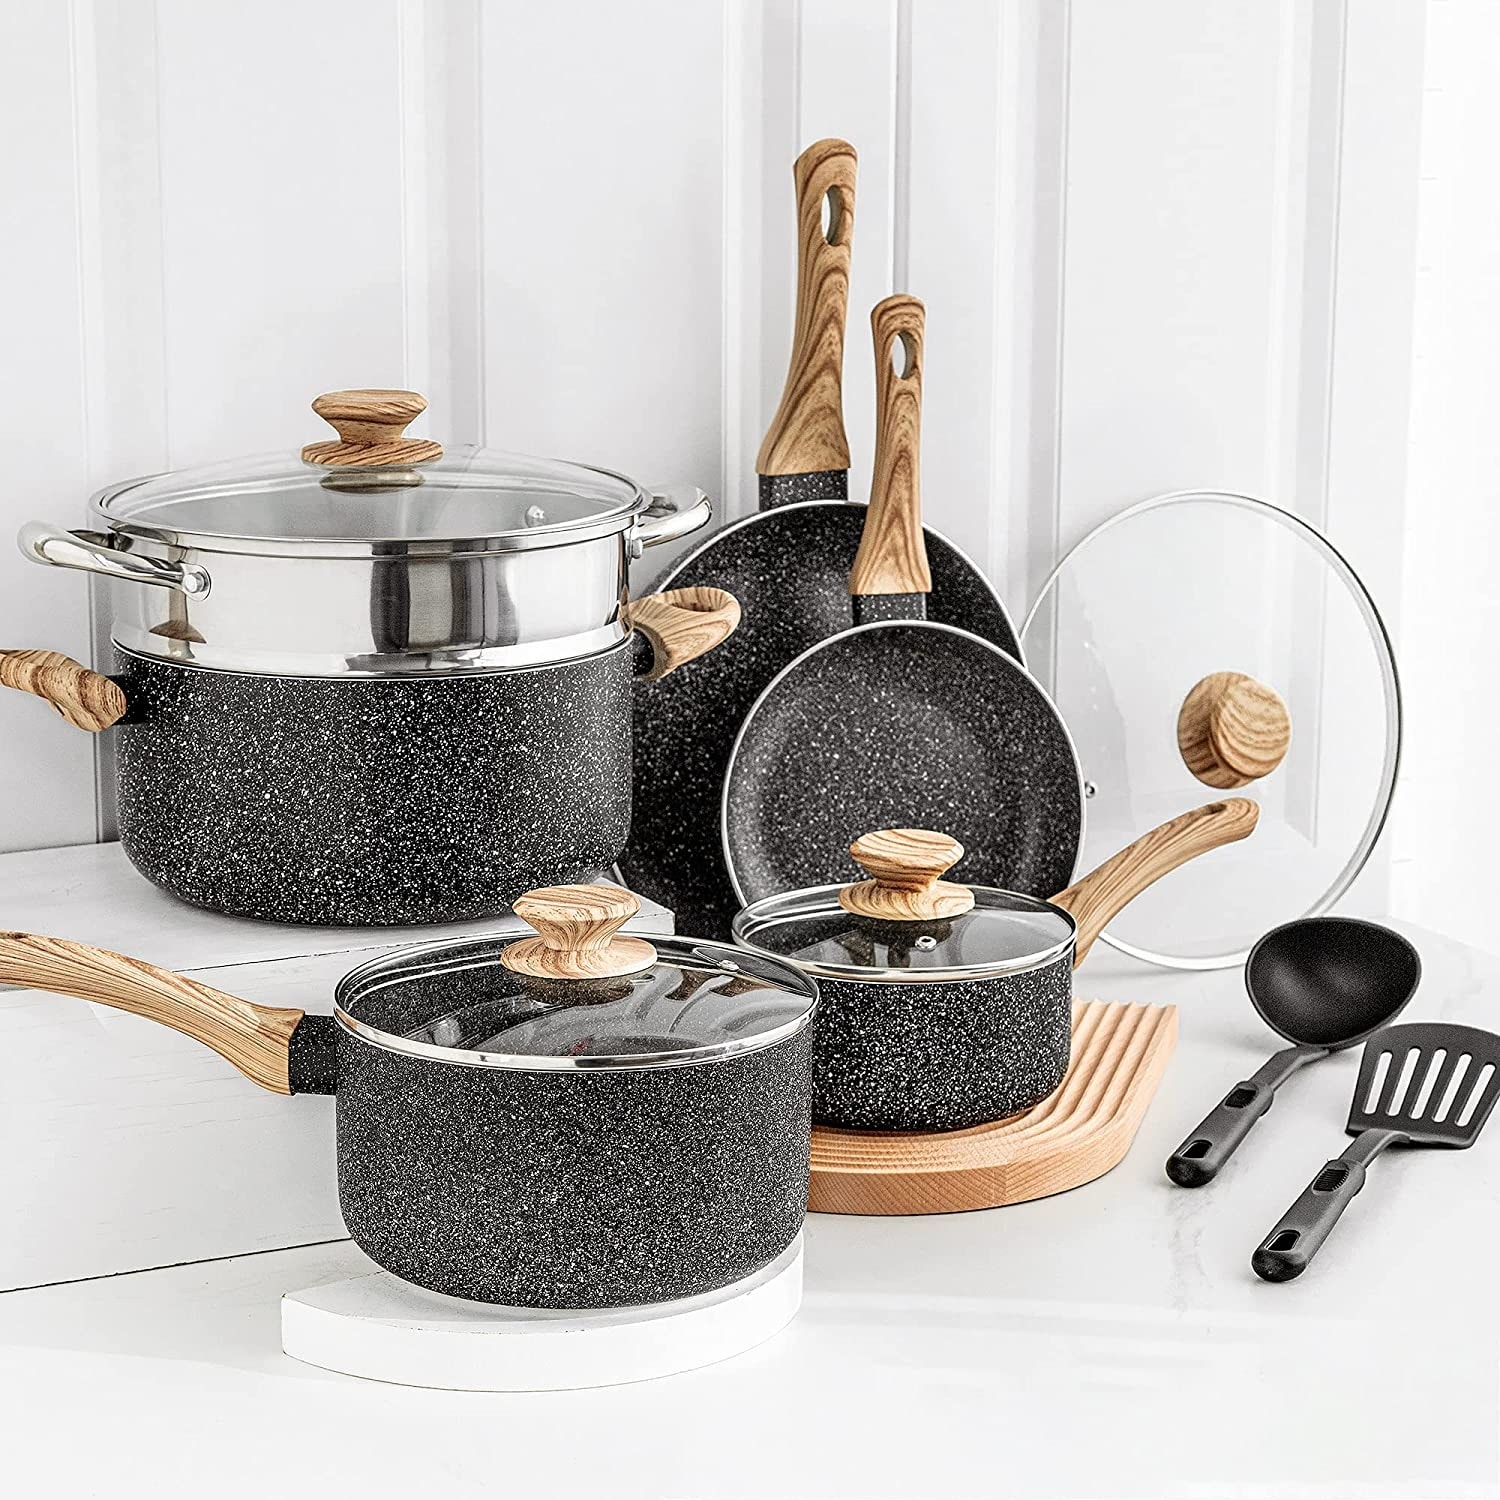 https://ak1.ostkcdn.com/images/products/is/images/direct/c82d1187eaaf0303433293baa96682444b279279/White-Pots-and-Pans-Set-Nonstick-Cookware-Sets%2C-12pcs-White-Granite-Cookware-Set-Induction-Compatible.jpg